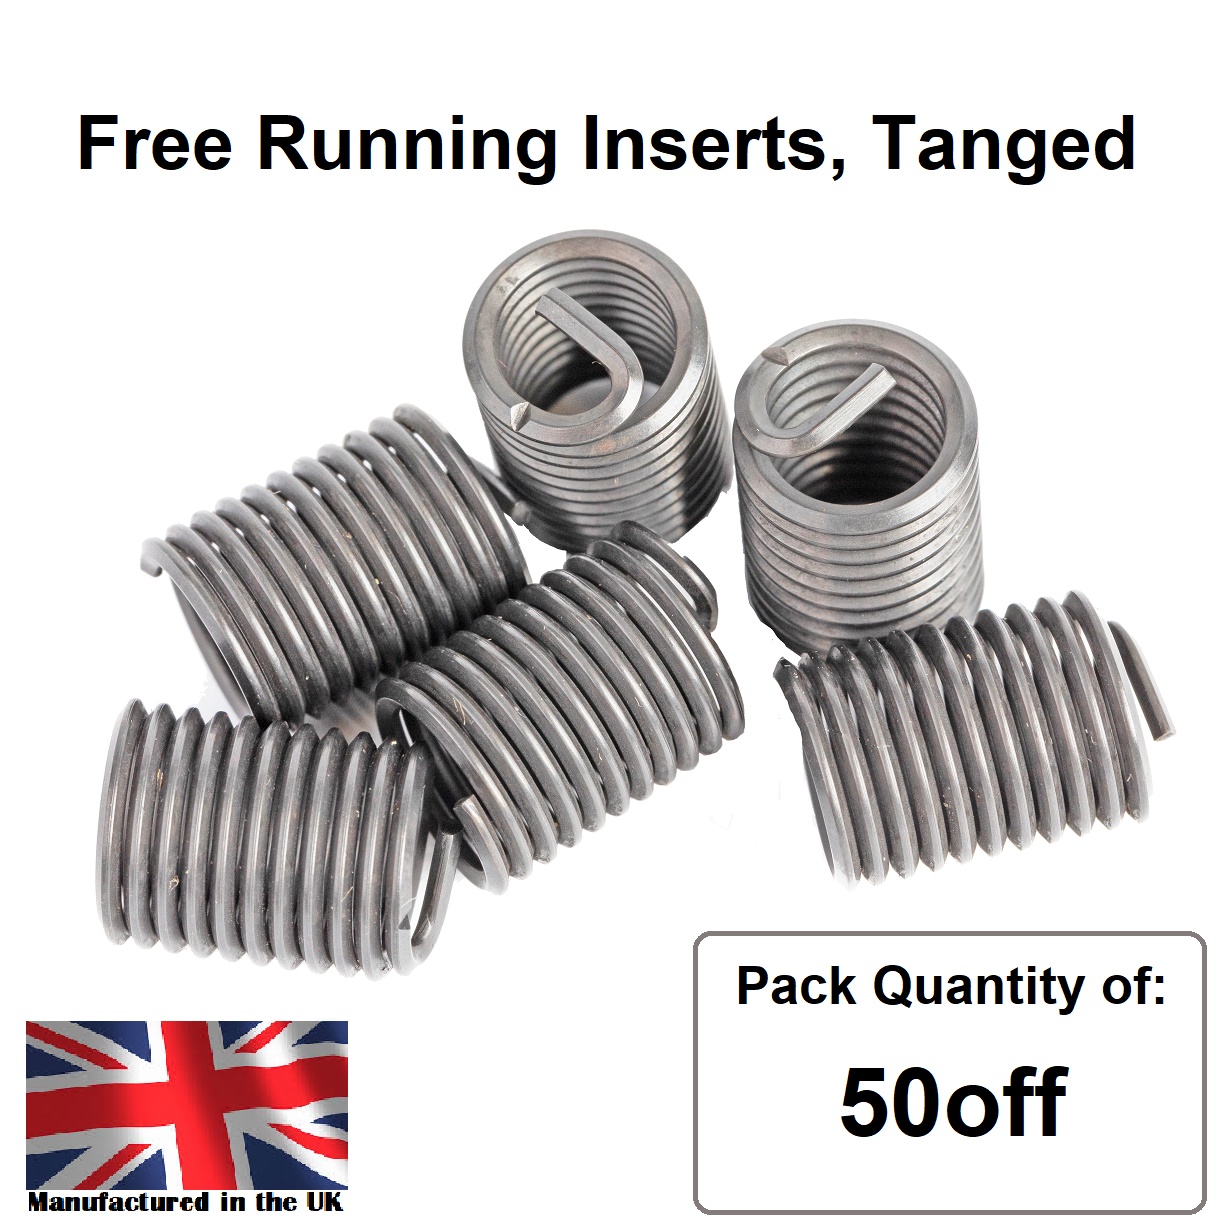 10-24 x 2.5D UNC, Free Running, Tanged, Wire Thread Repair Insert, 304/A2 Stainless (Pack 50)